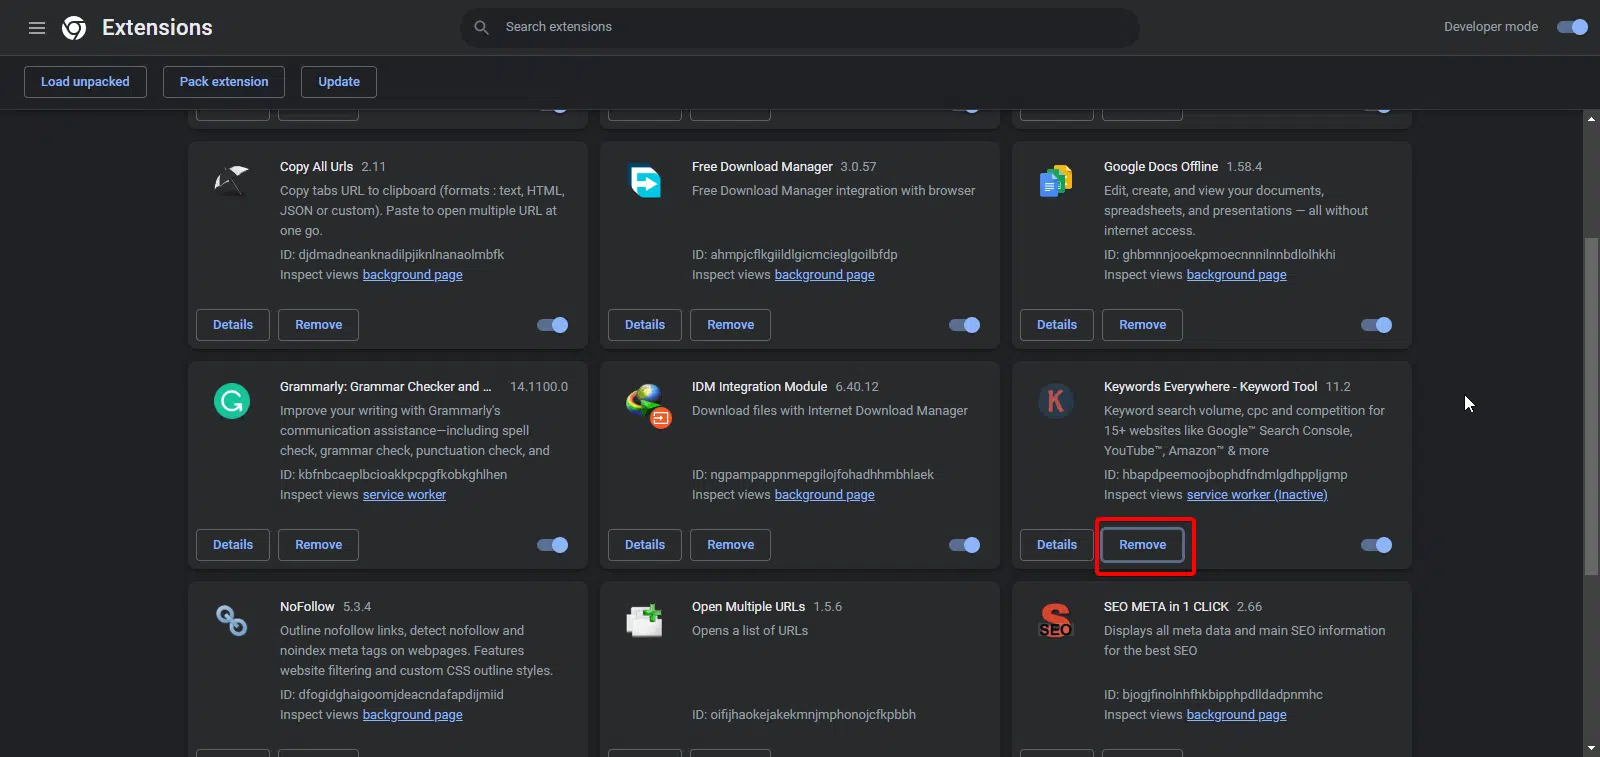 How to uninstall extensions on Chromebook